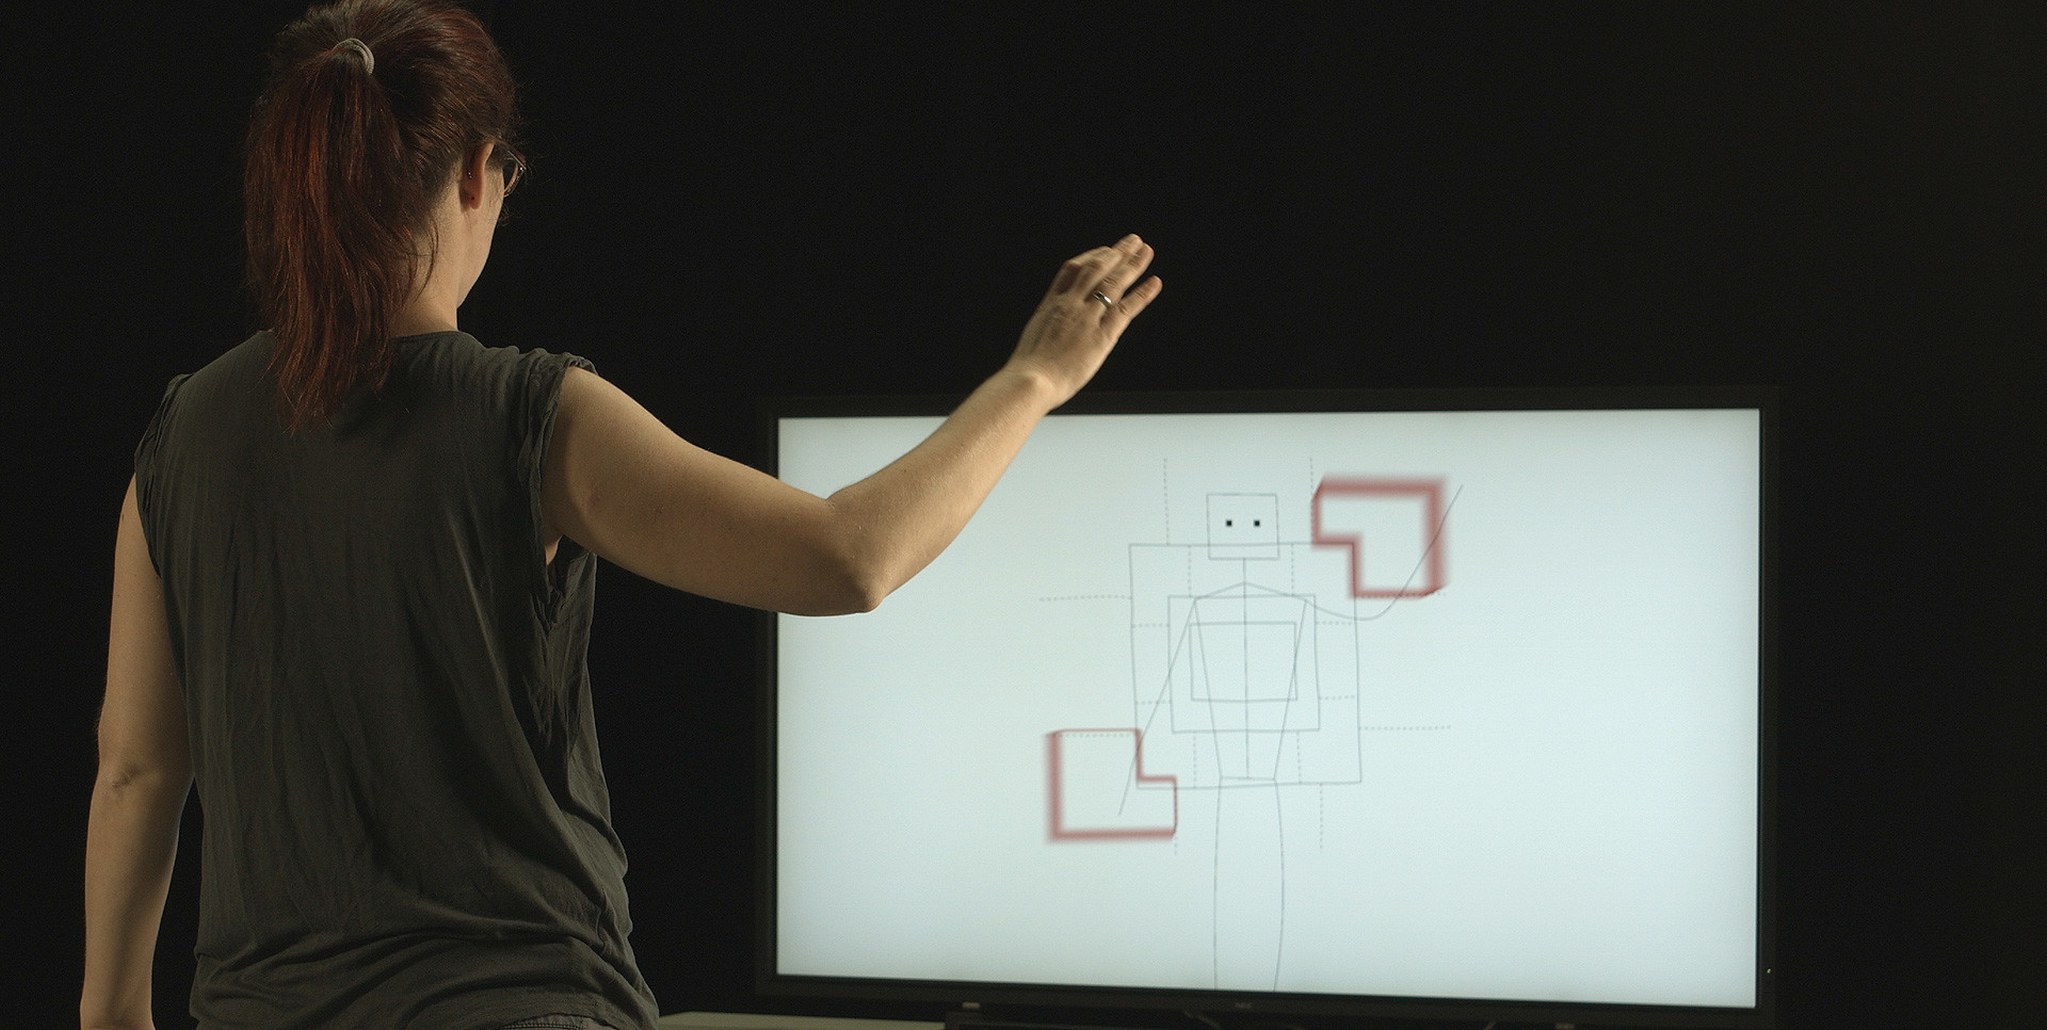 Gesture Space Visualizer / Ars Electronica Futurelab (AT)